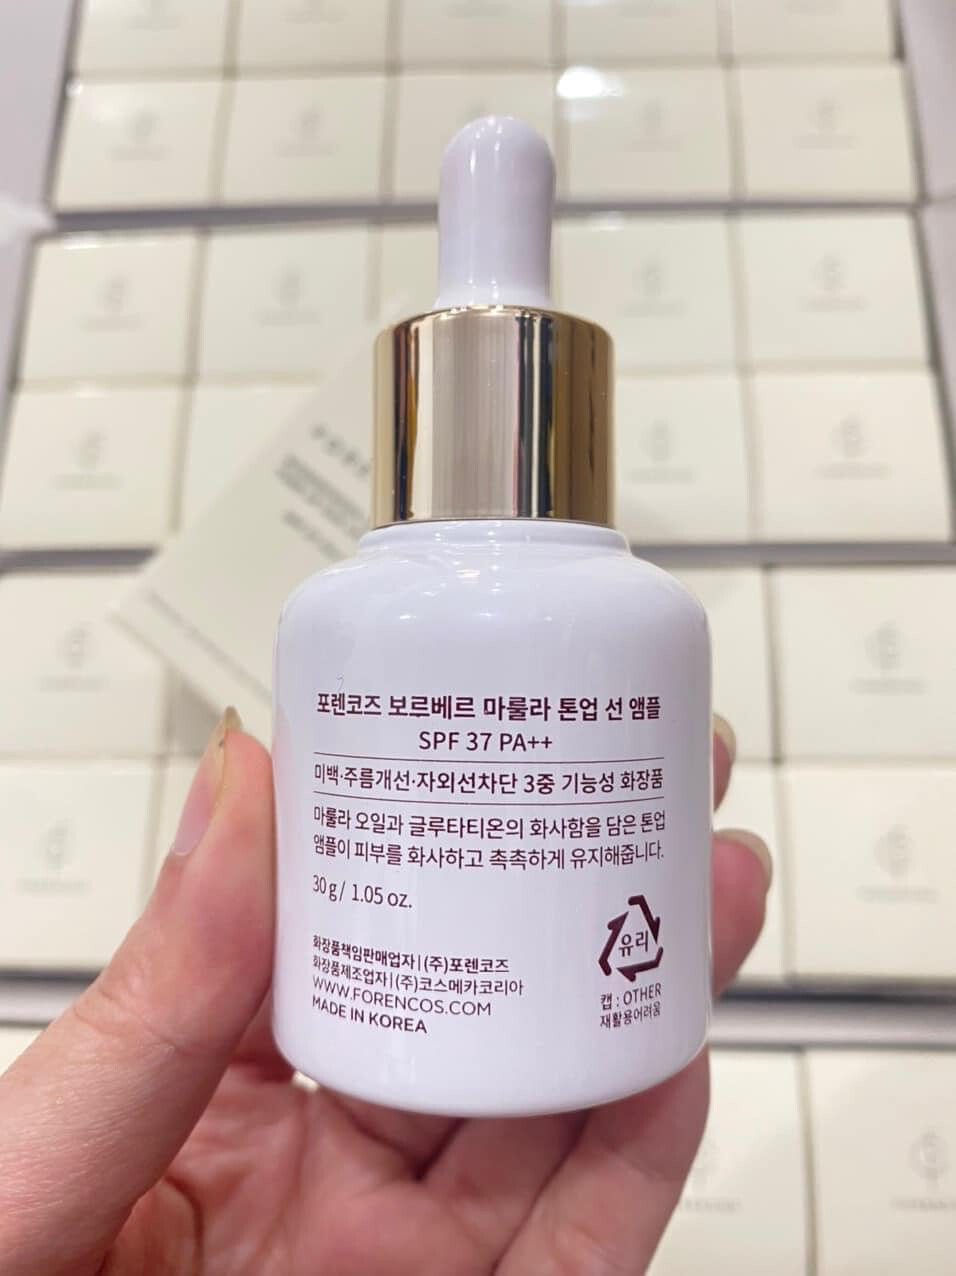 SERUM CHỐNG NẮNG FORENCOS WONDERWERK MARULA TONE UP SUN AMPOULE SPF 37 PA++